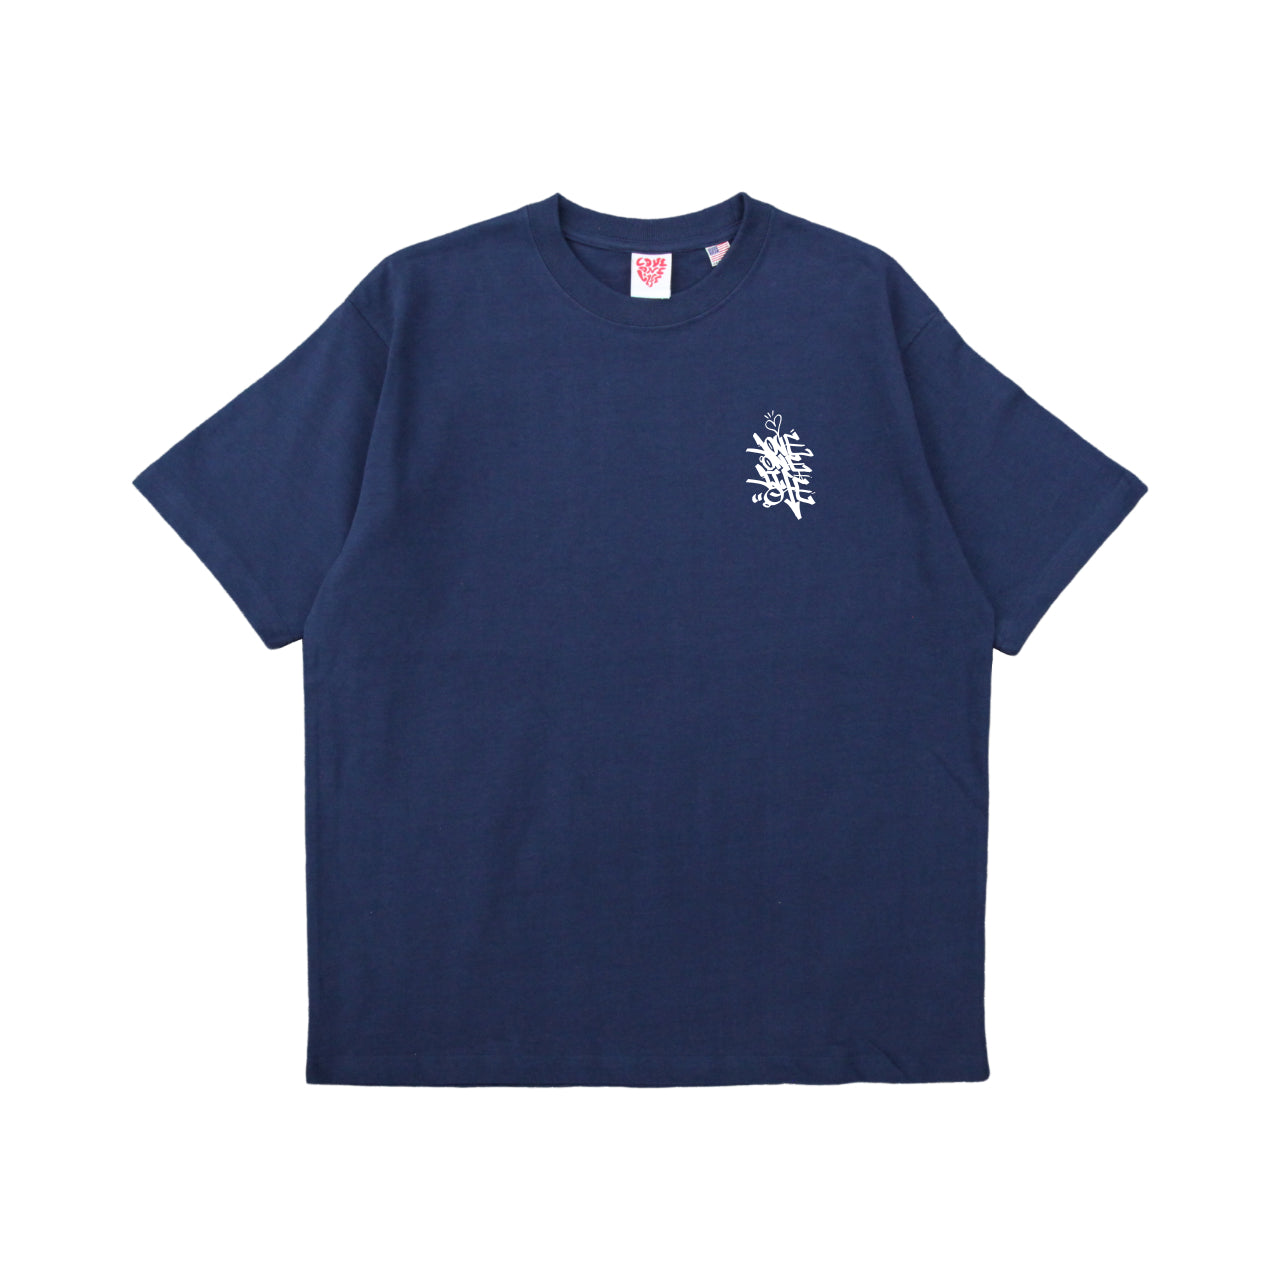 better soul tagging tee in deep blue